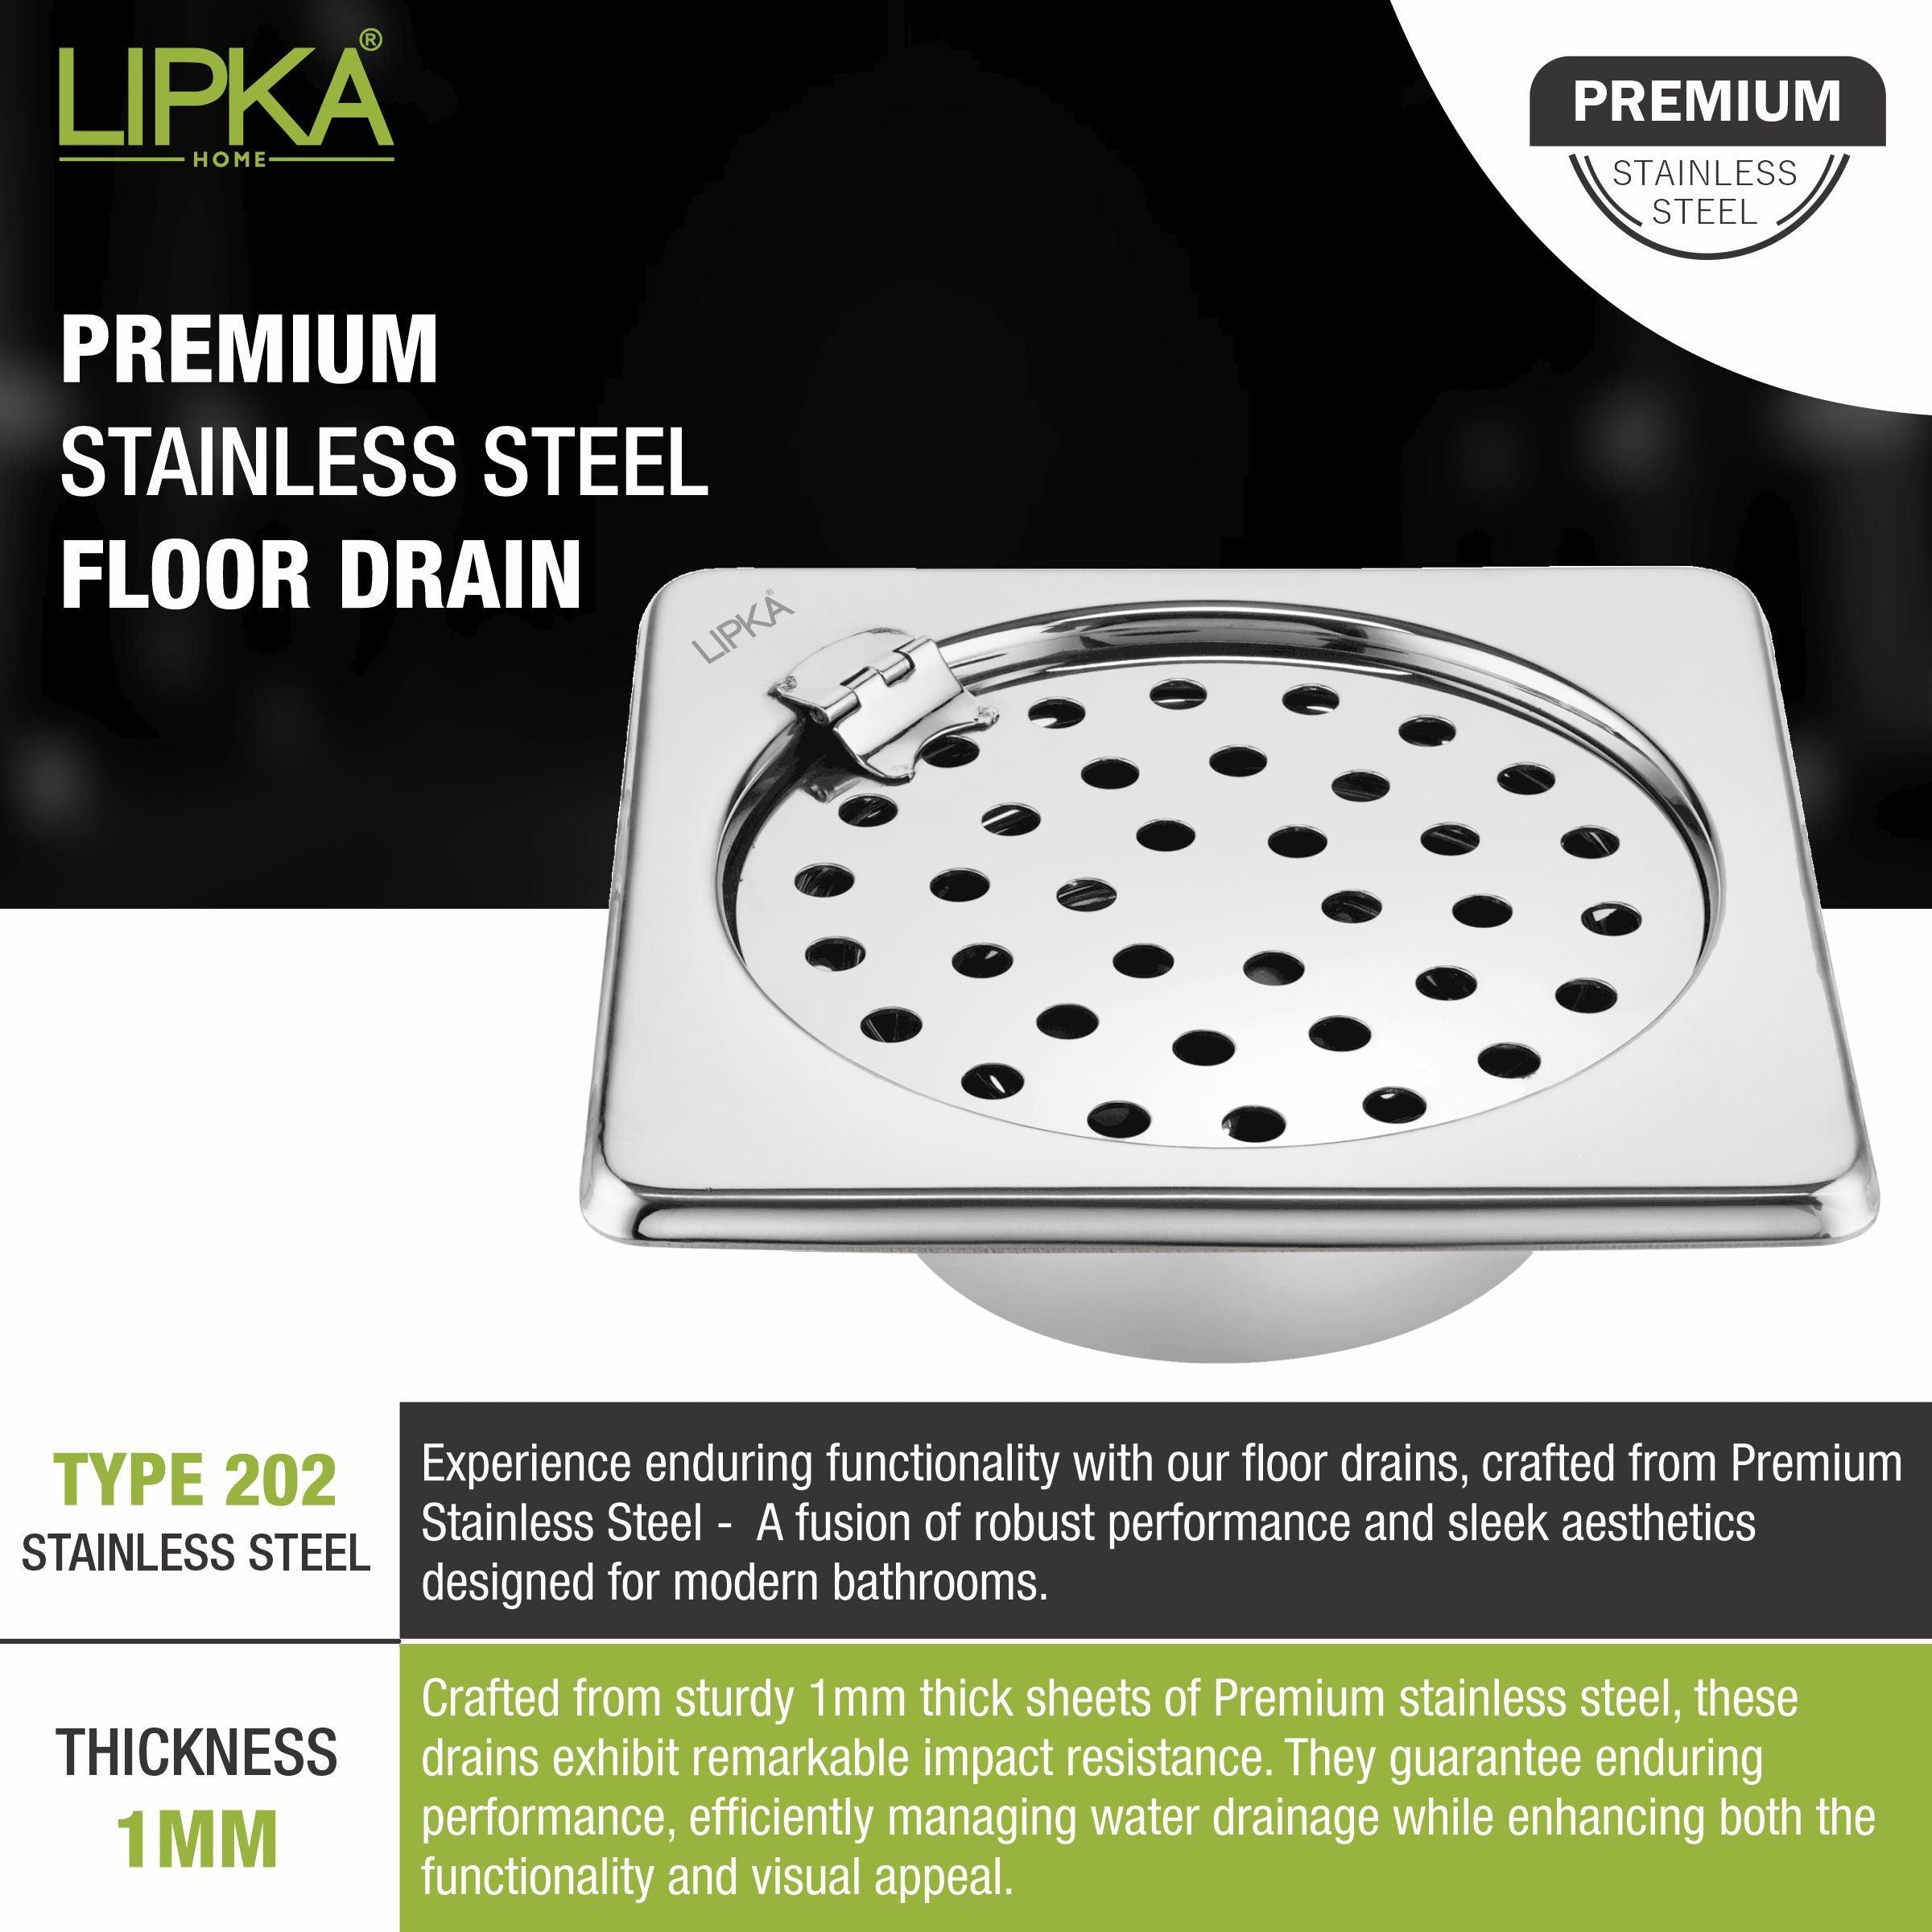 Super Sleek Square Floor Drain (6 x 6 Inches) With Hinge and Cockroach Trap - LIPKA - Lipka Home